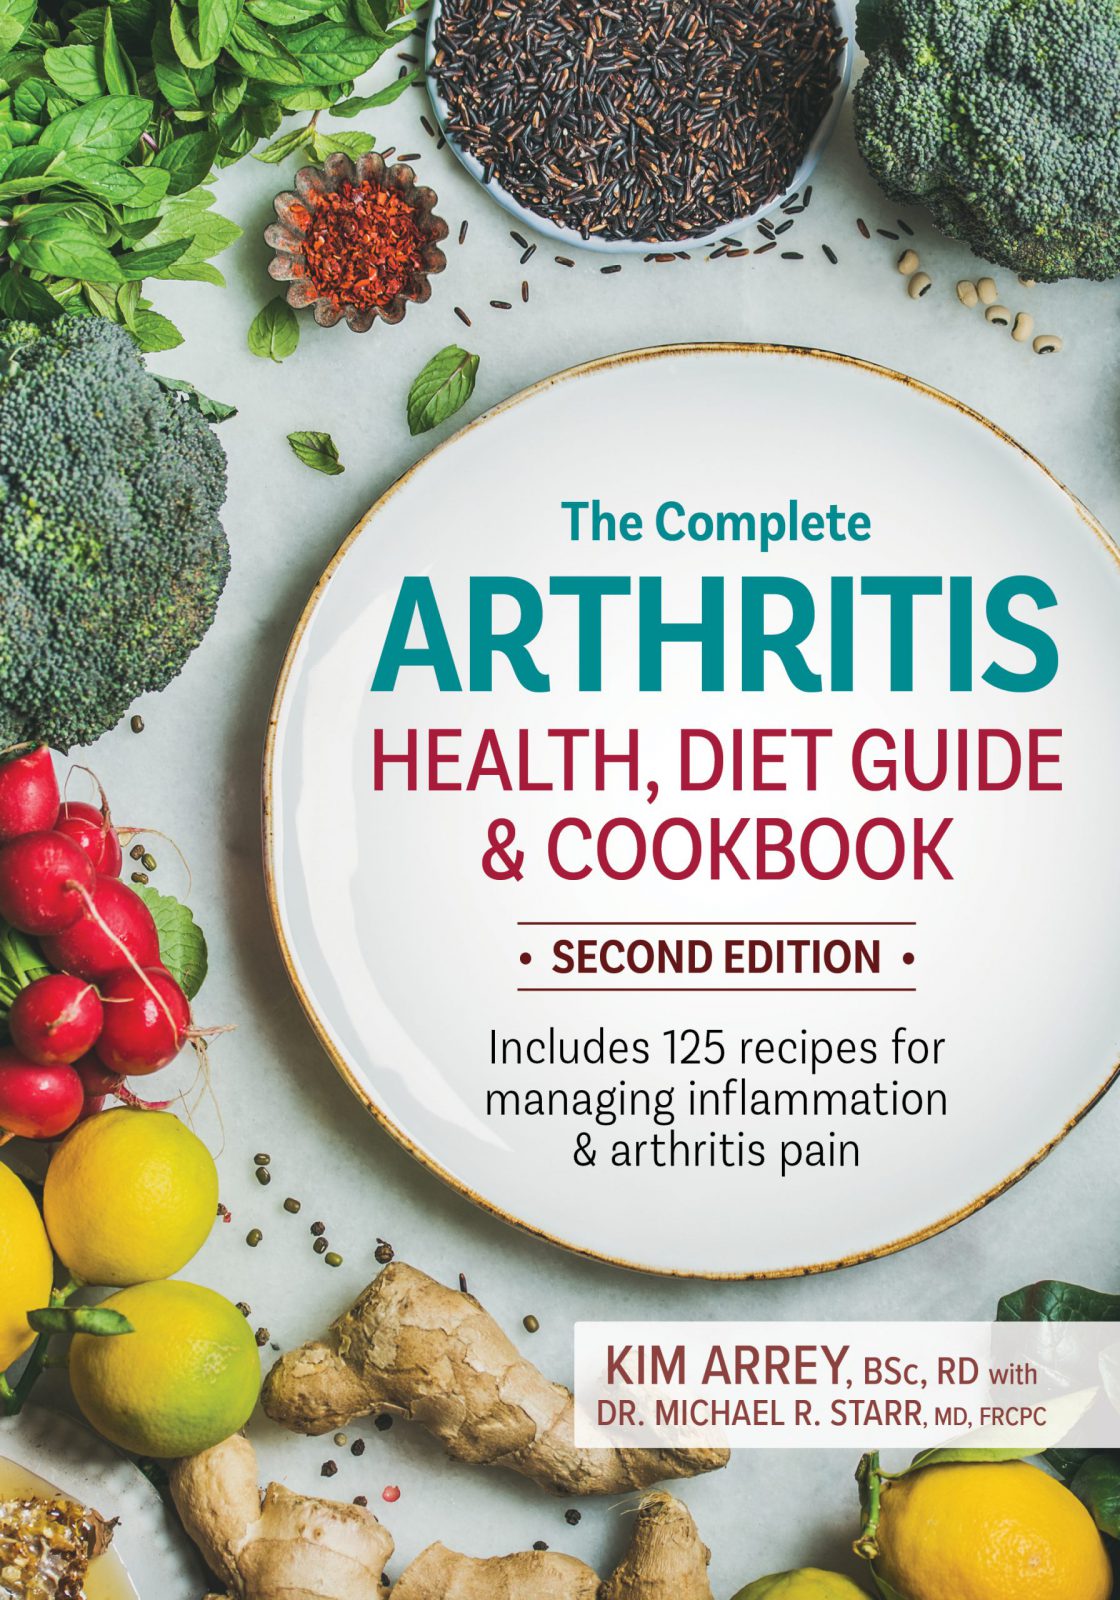 The Complete Arthritis Health, Diet Guide and Cookbook